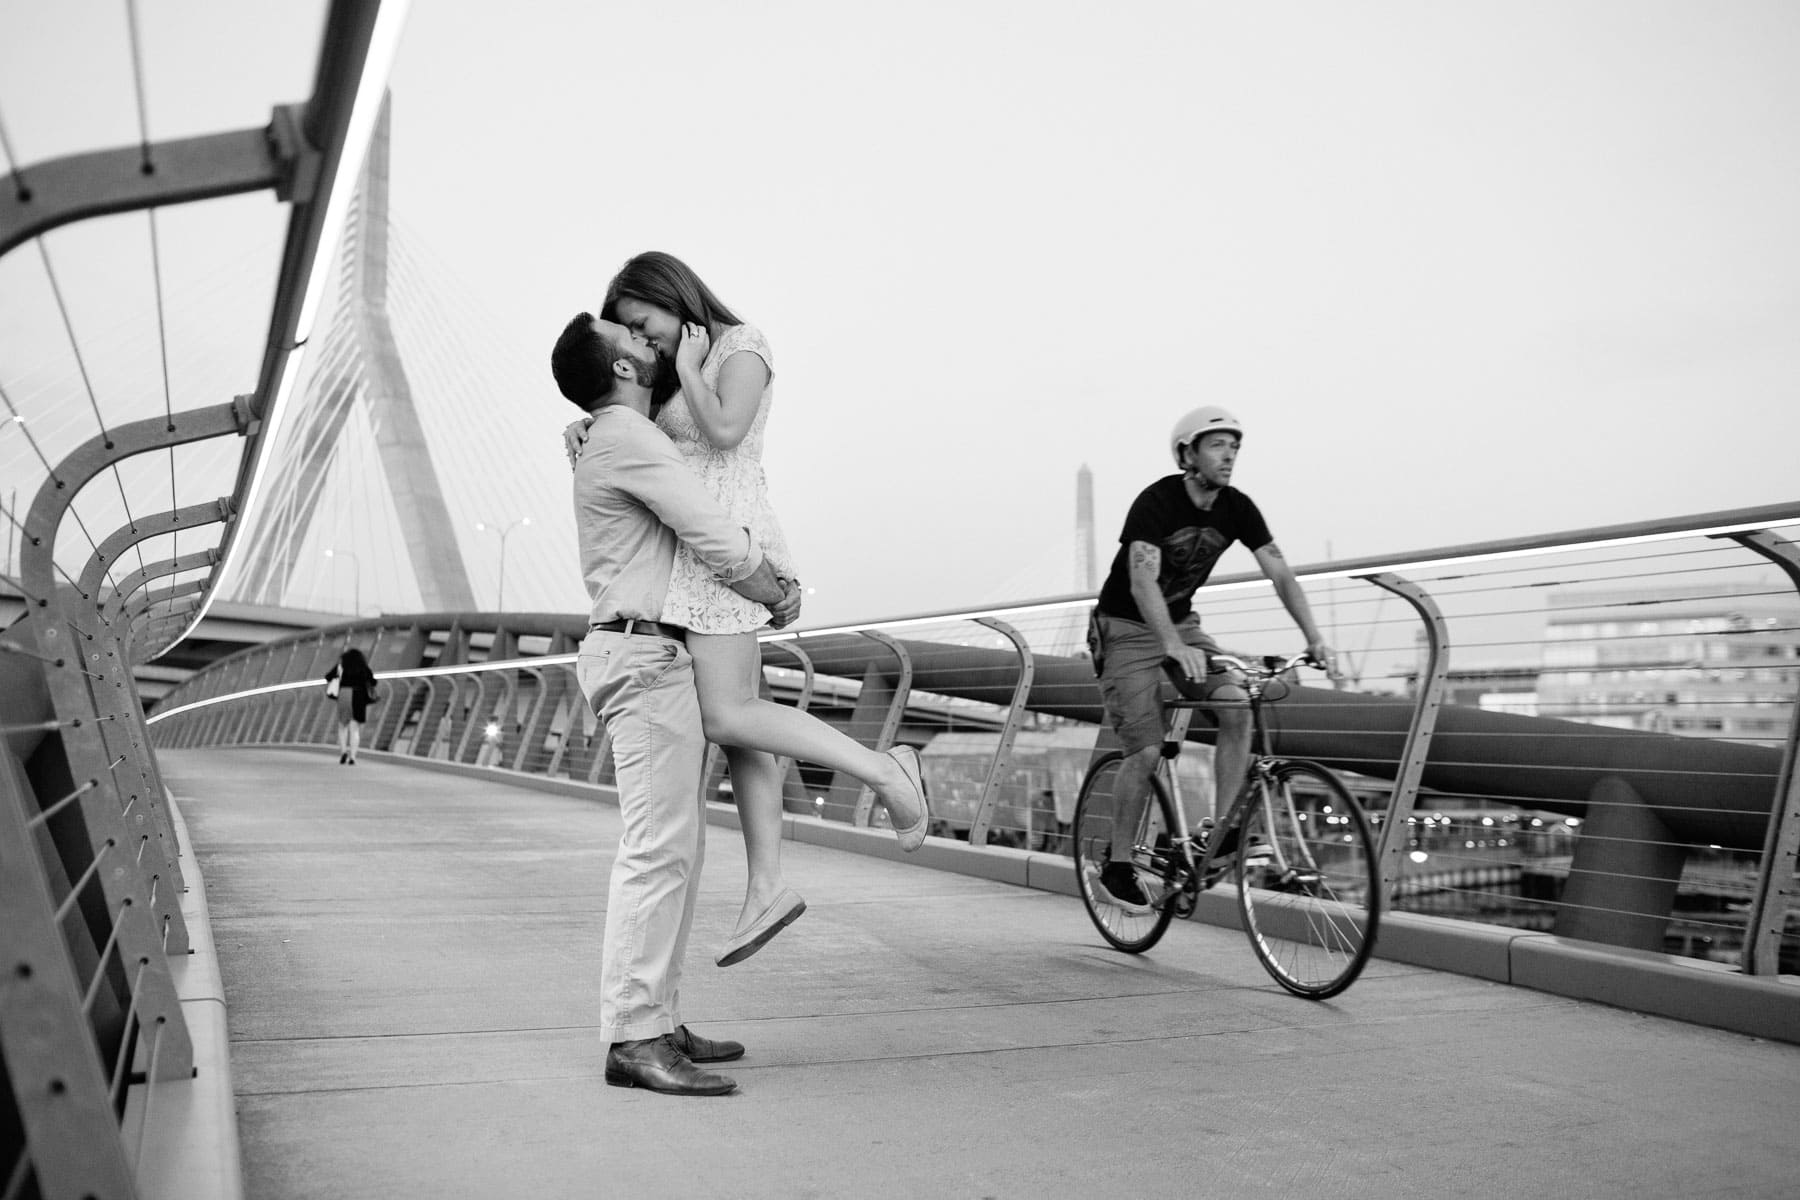 Peggy and Anthony's engagement photography session by the Zakim Bridge - North Point Park | Kelly Benvenuto Photography | Boston Engagement Photographer